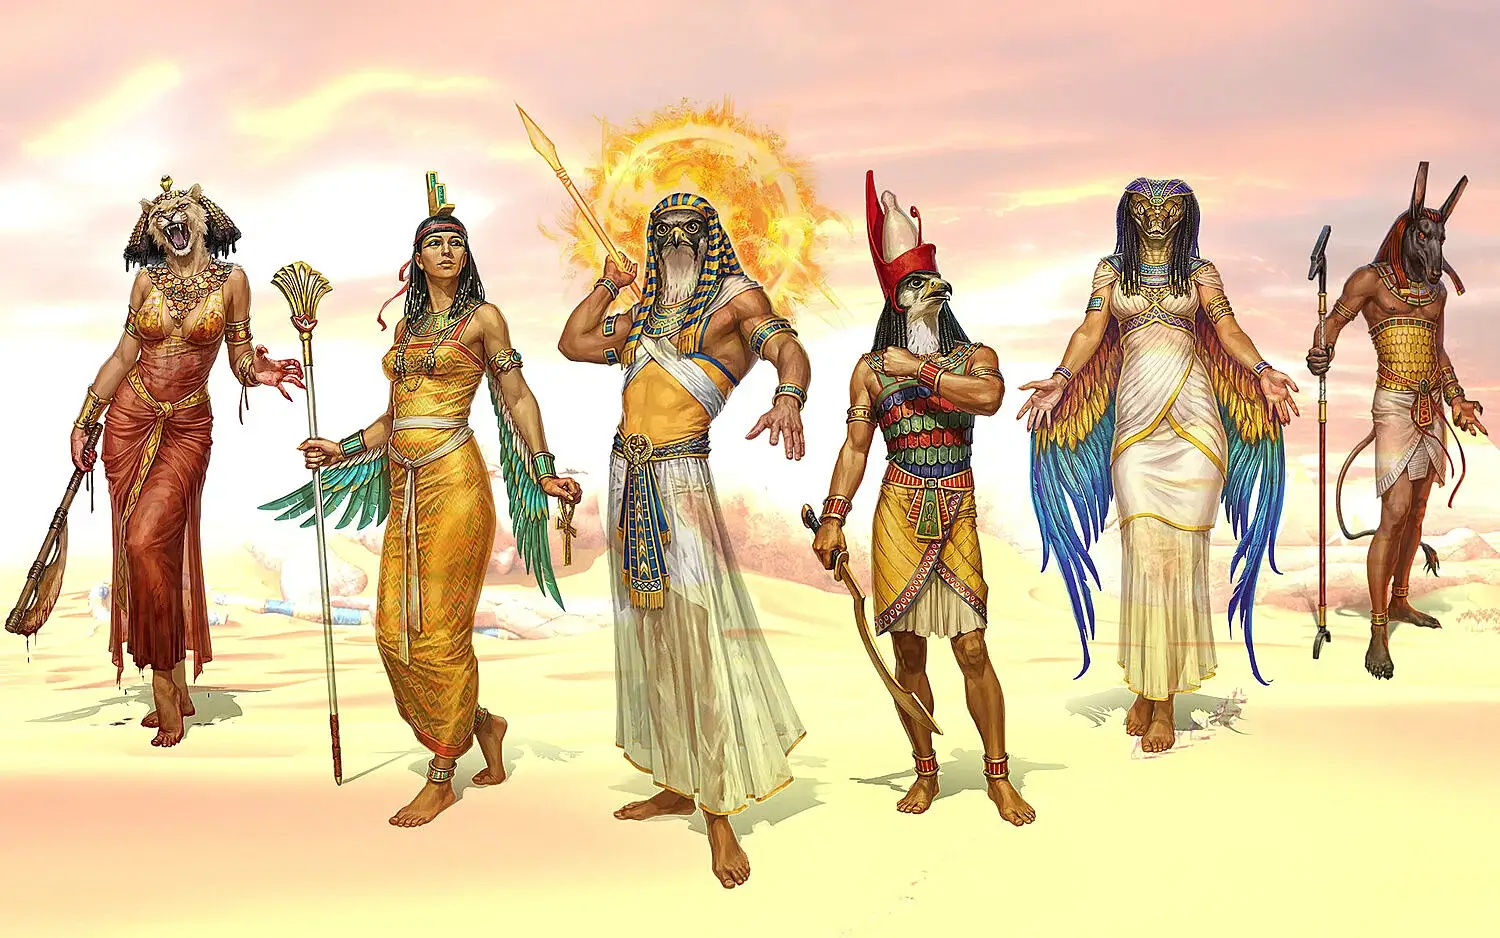 Have You Heard of All These Egyptian Gods?